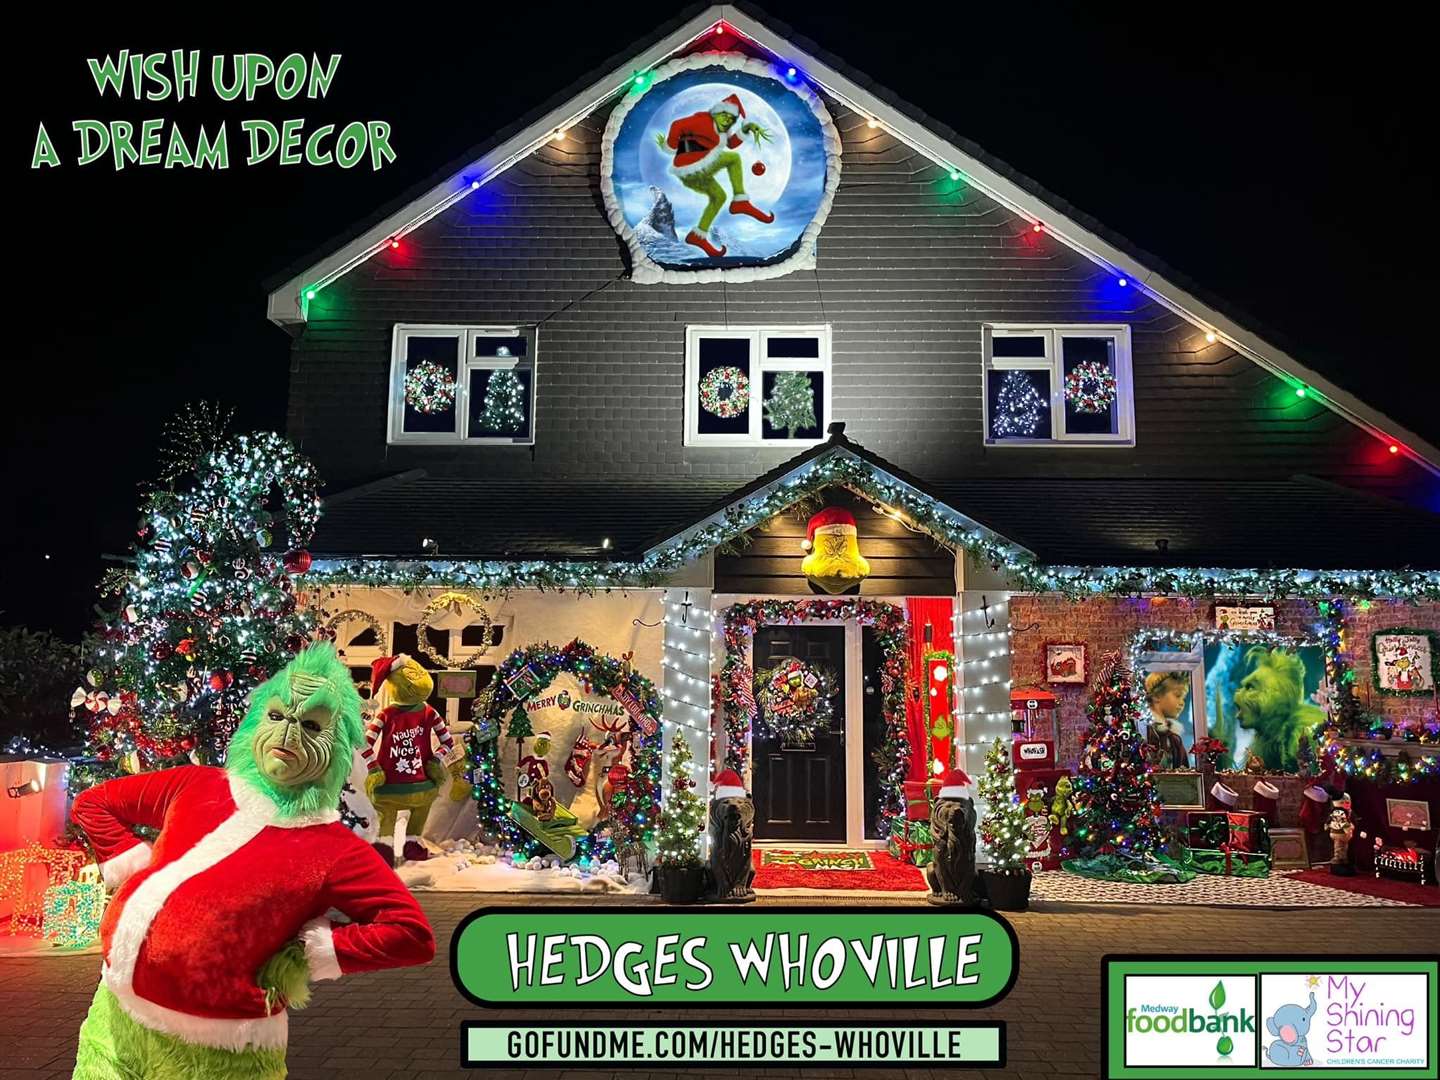 The Hedges' Whoville display in Wigmore. Picture: Lavinia Hedges